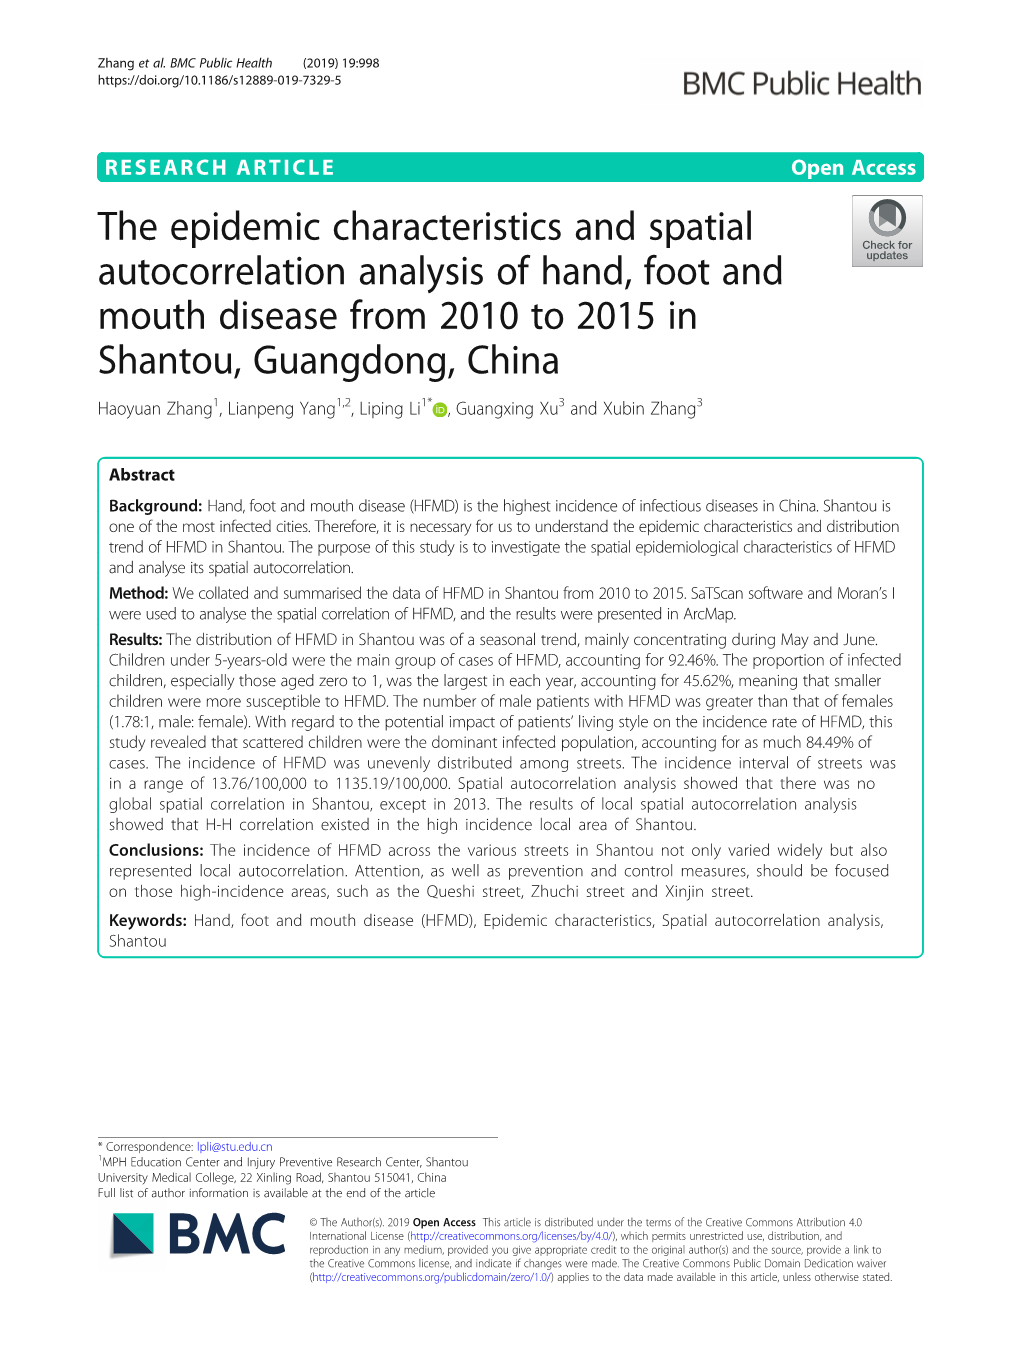 The Epidemic Characteristics and Spatial